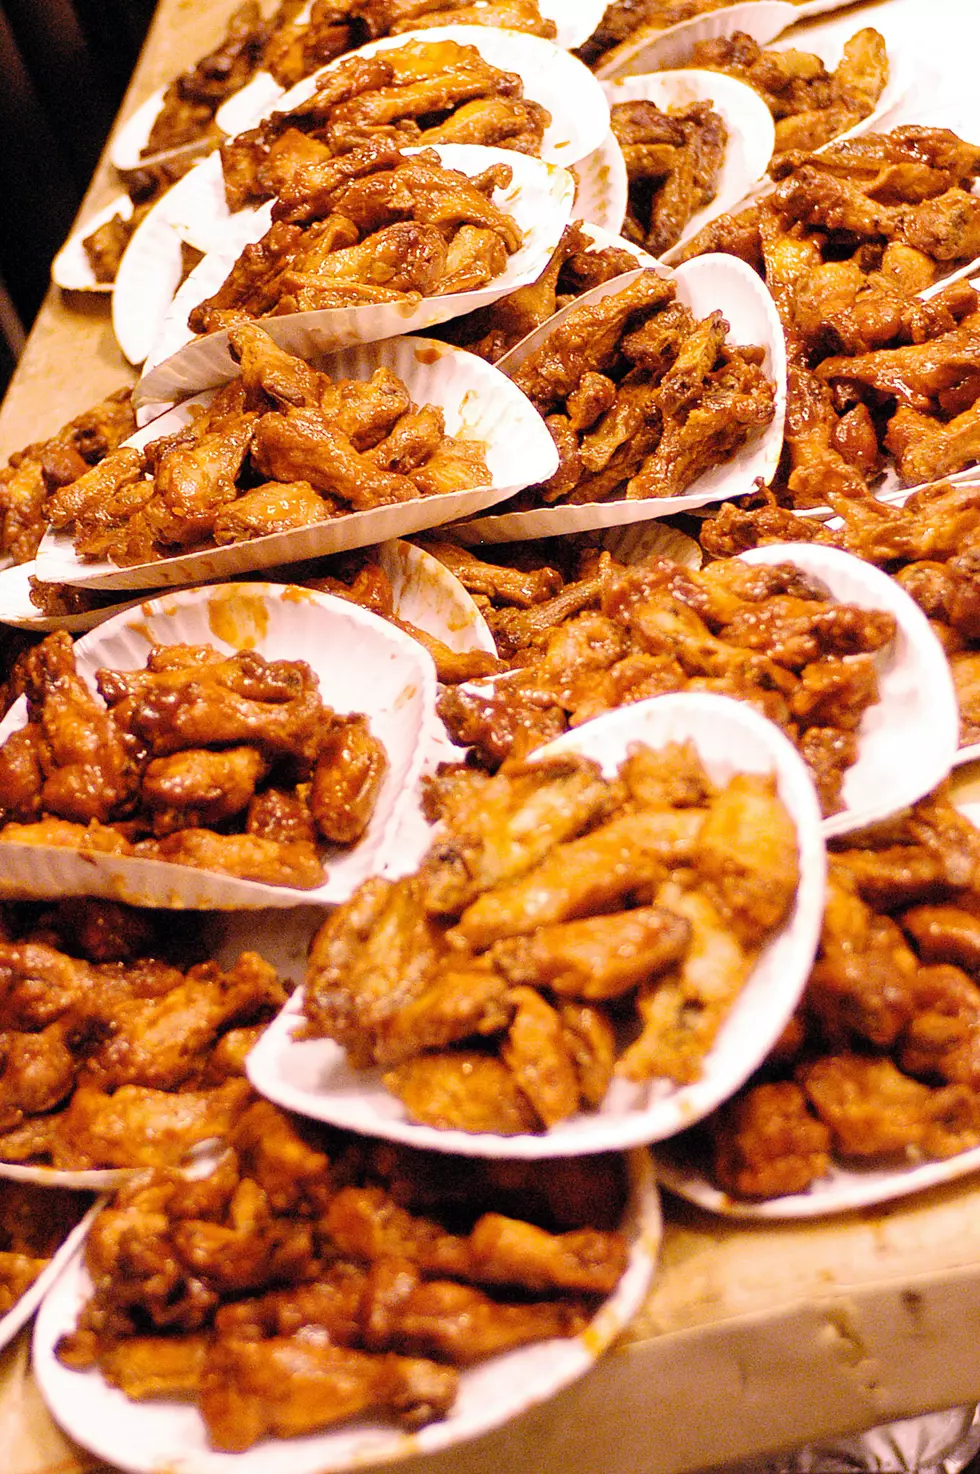 This Group Says It’s Time To Stop Eating Buffalo Wings